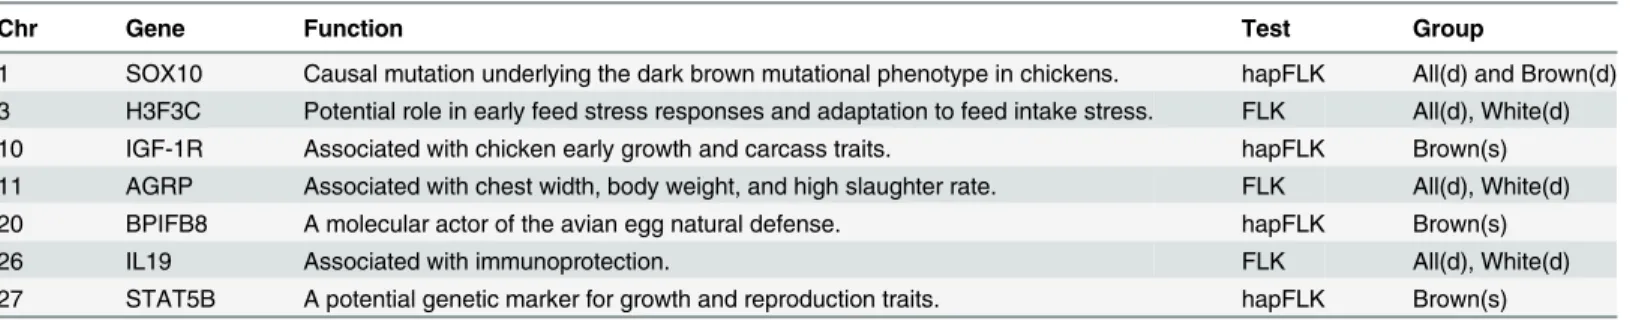 Table 2. Genes associated with productive traits in FLK and hapFLK analysis in all three studies